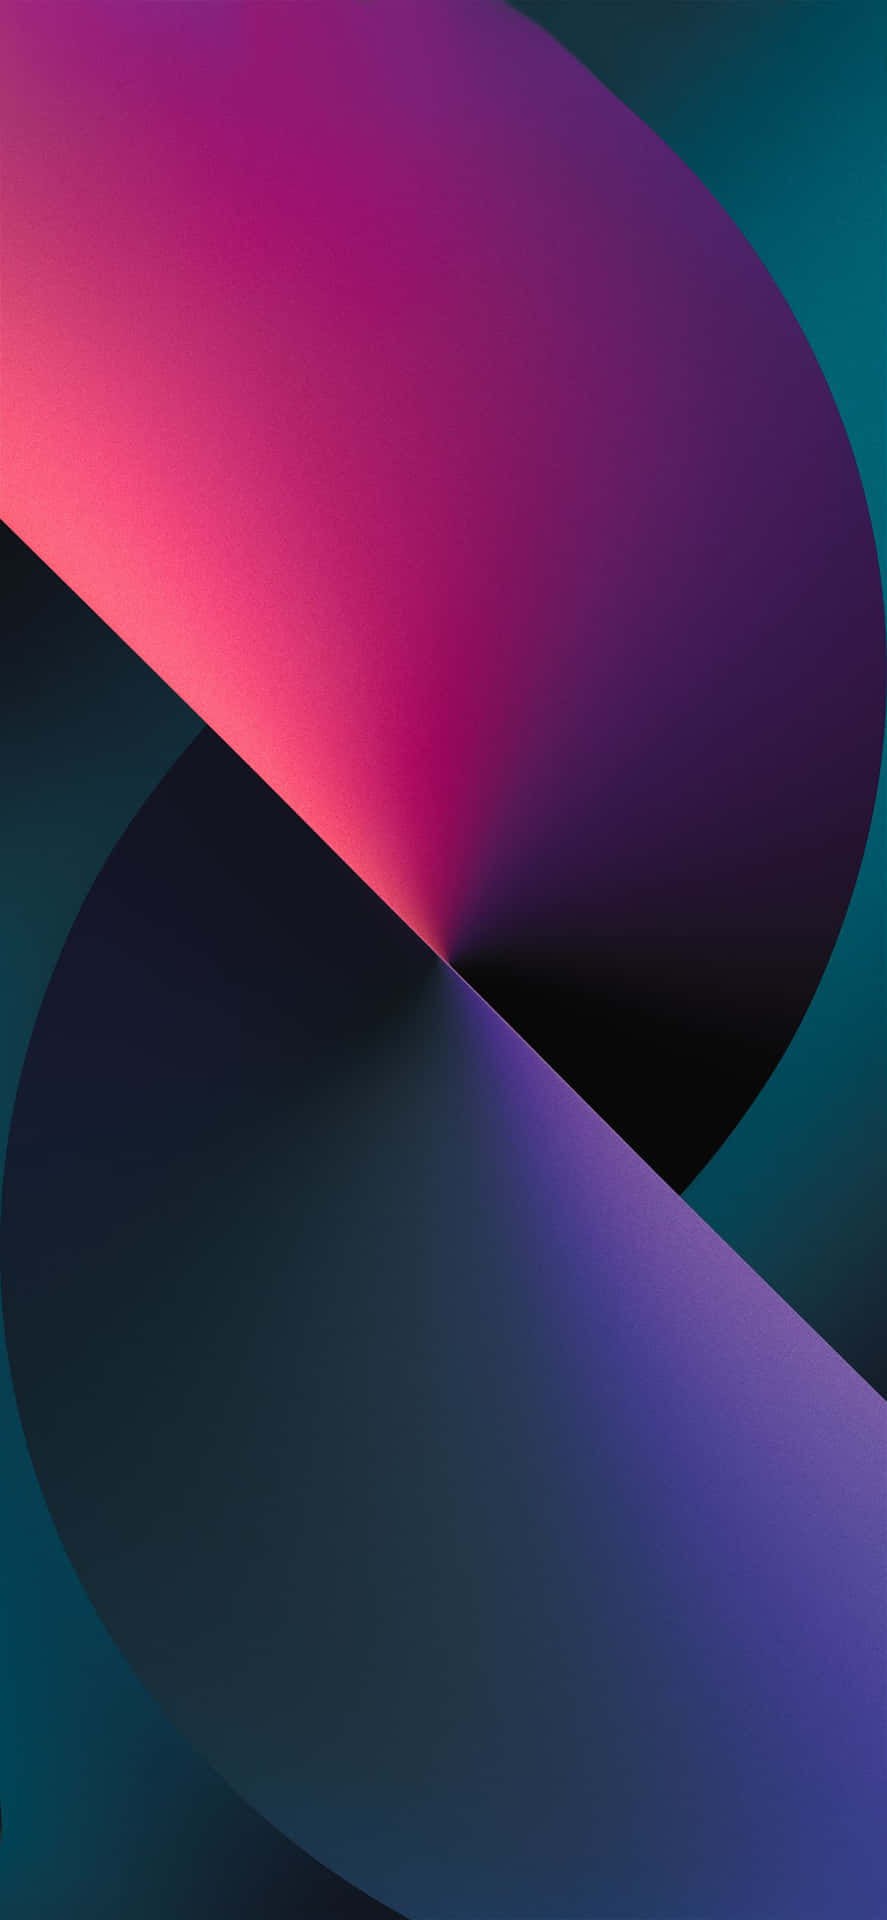 A Purple And Blue Abstract Design